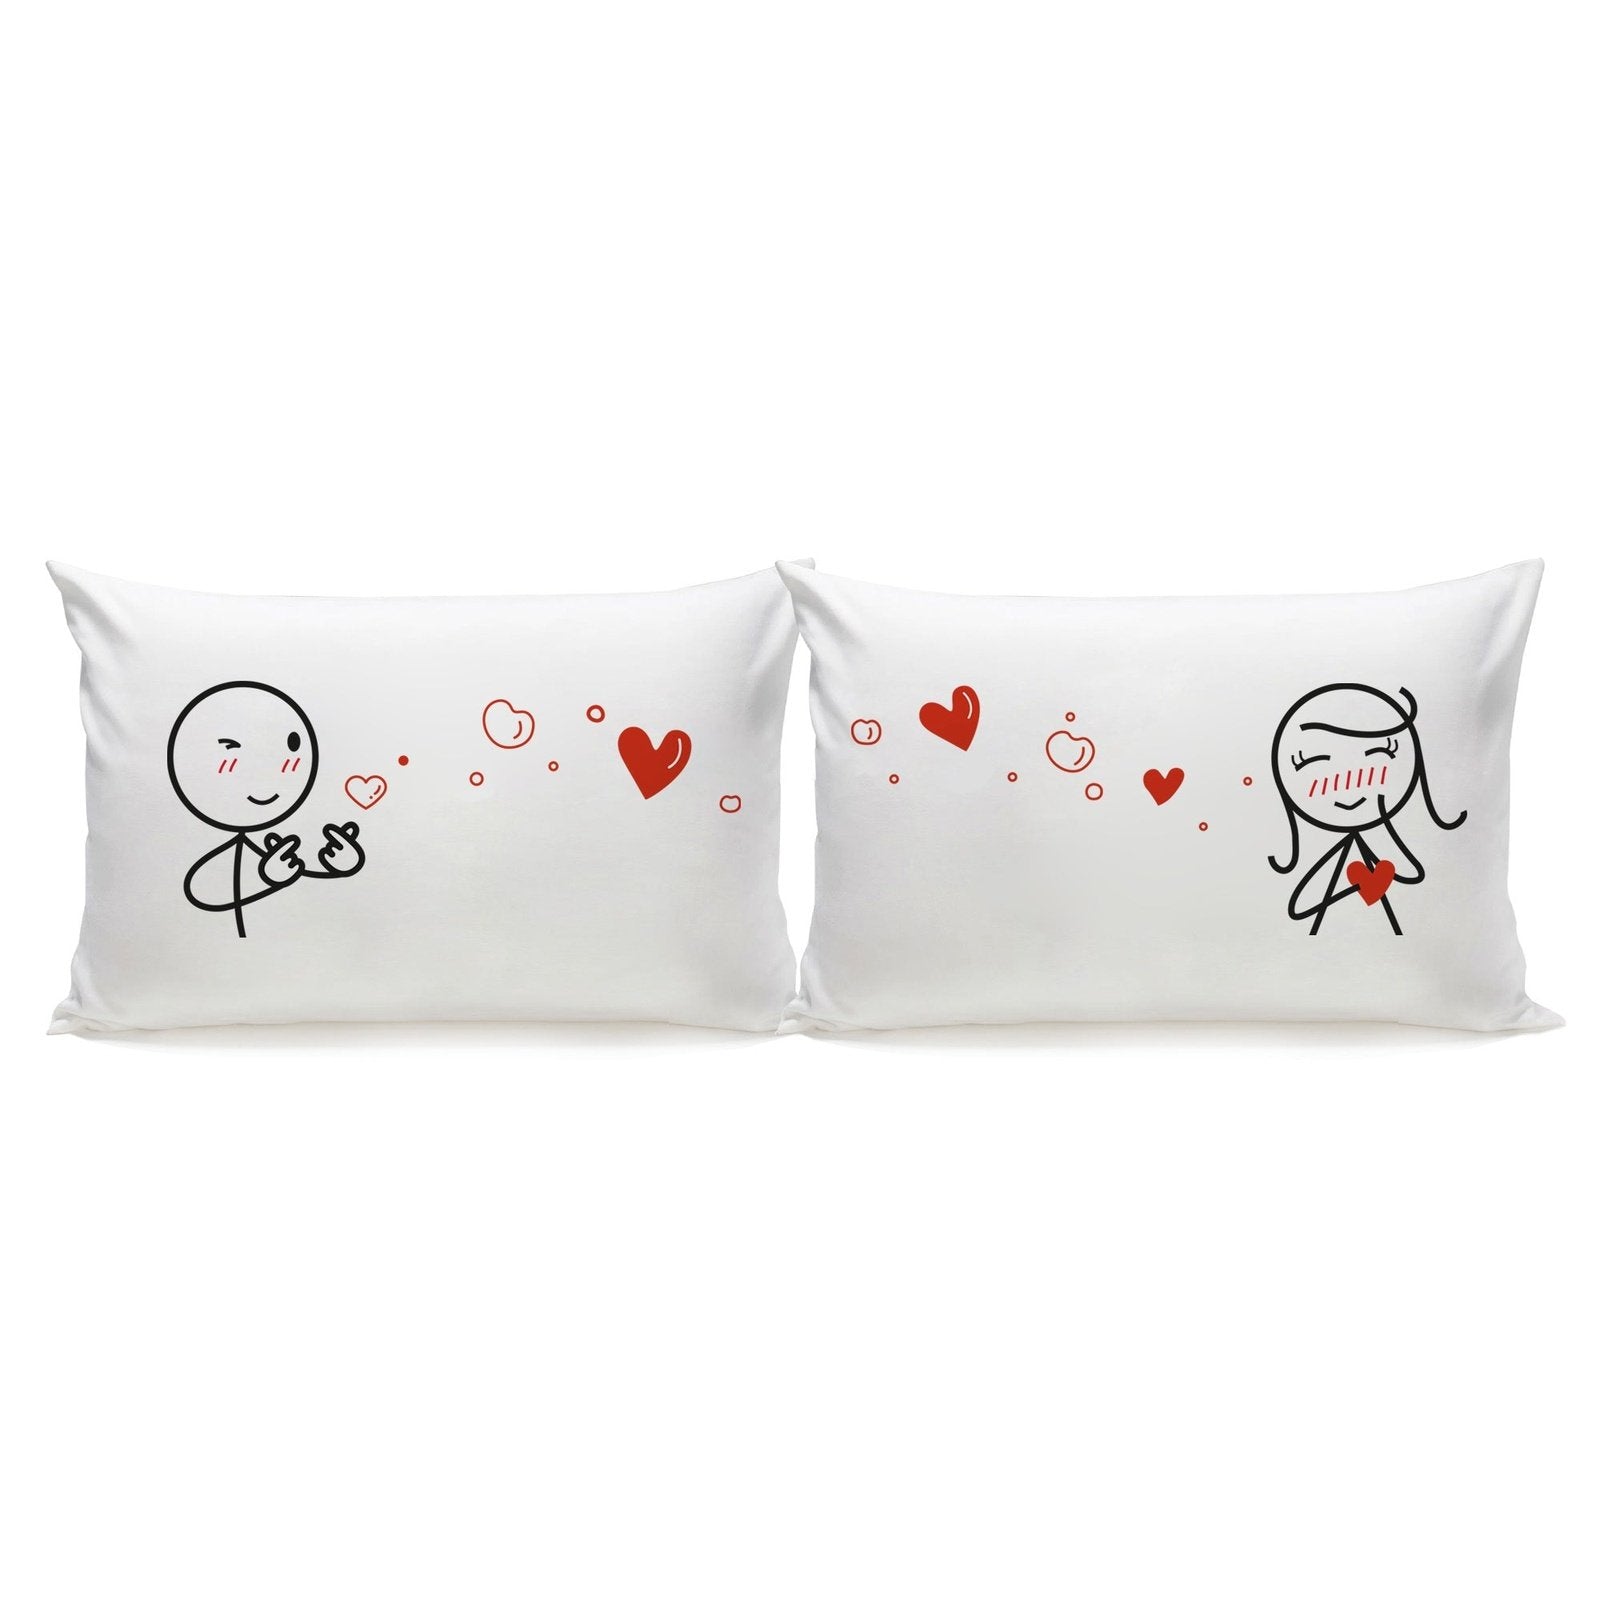 Mini heart BIG love!Home & GardenHuman Touch OfficialShow your big love with this adorable Mini Heart Big Love couple pillowcase. Customize it with your names, a special date, or any message that's special to your love